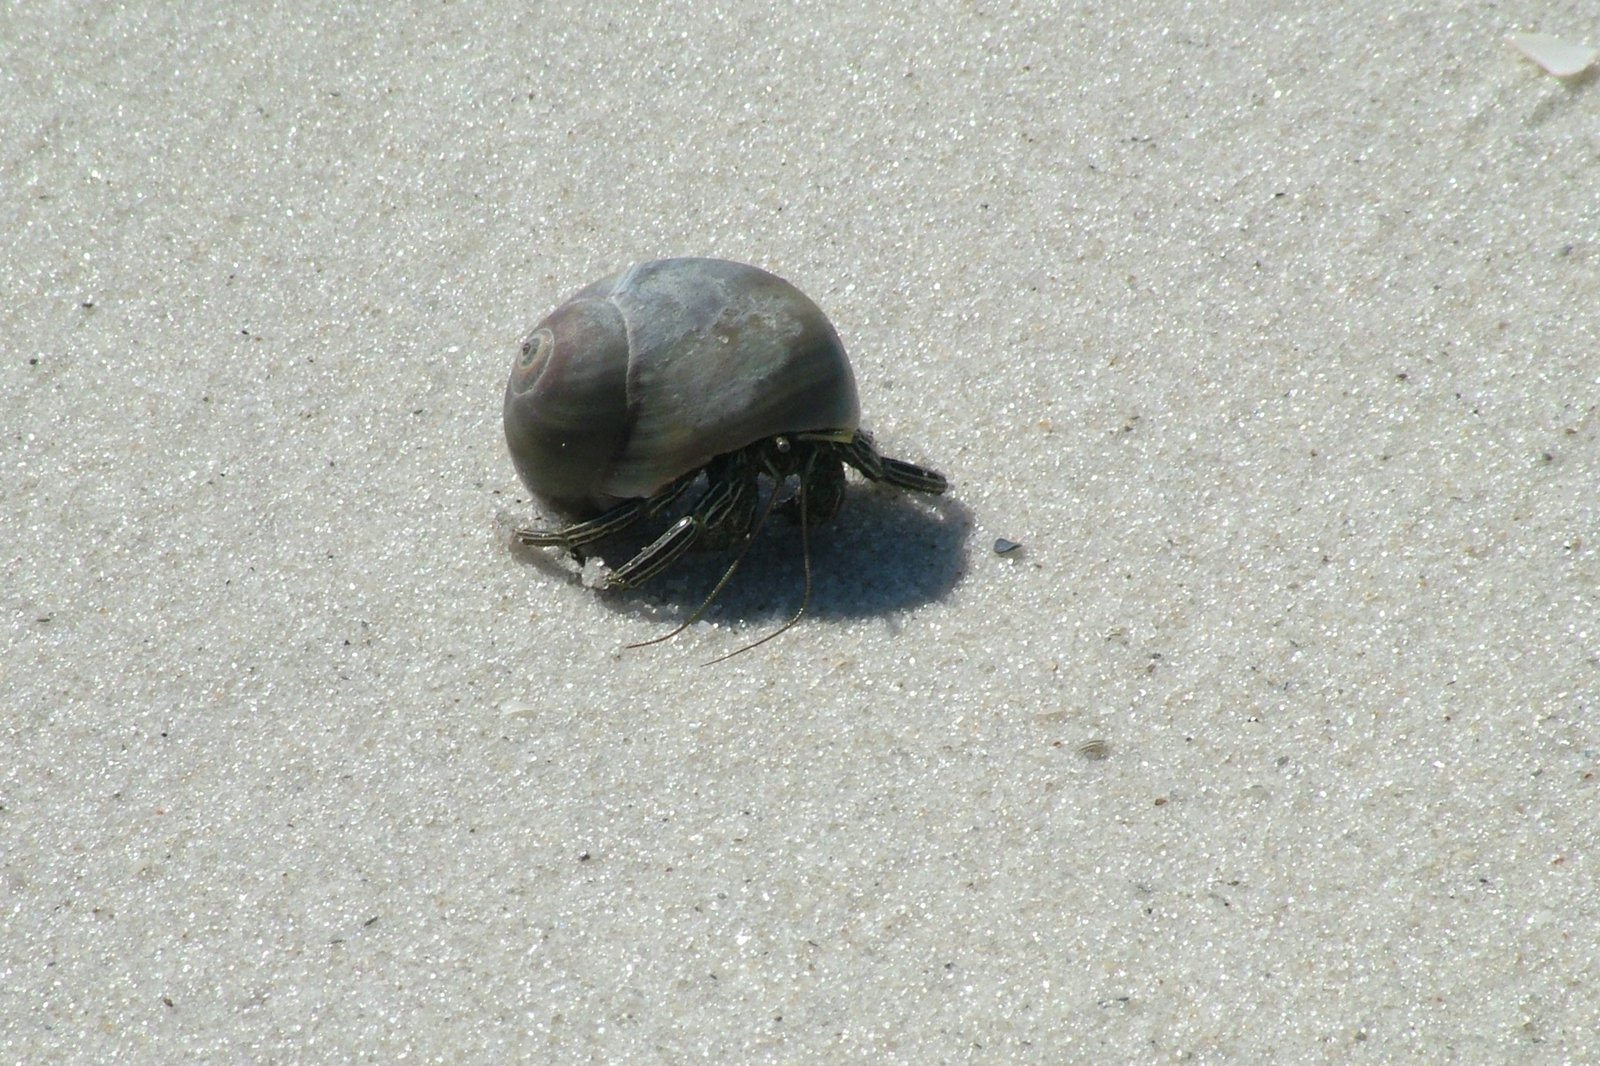 a shell is shown on the sand at the beach